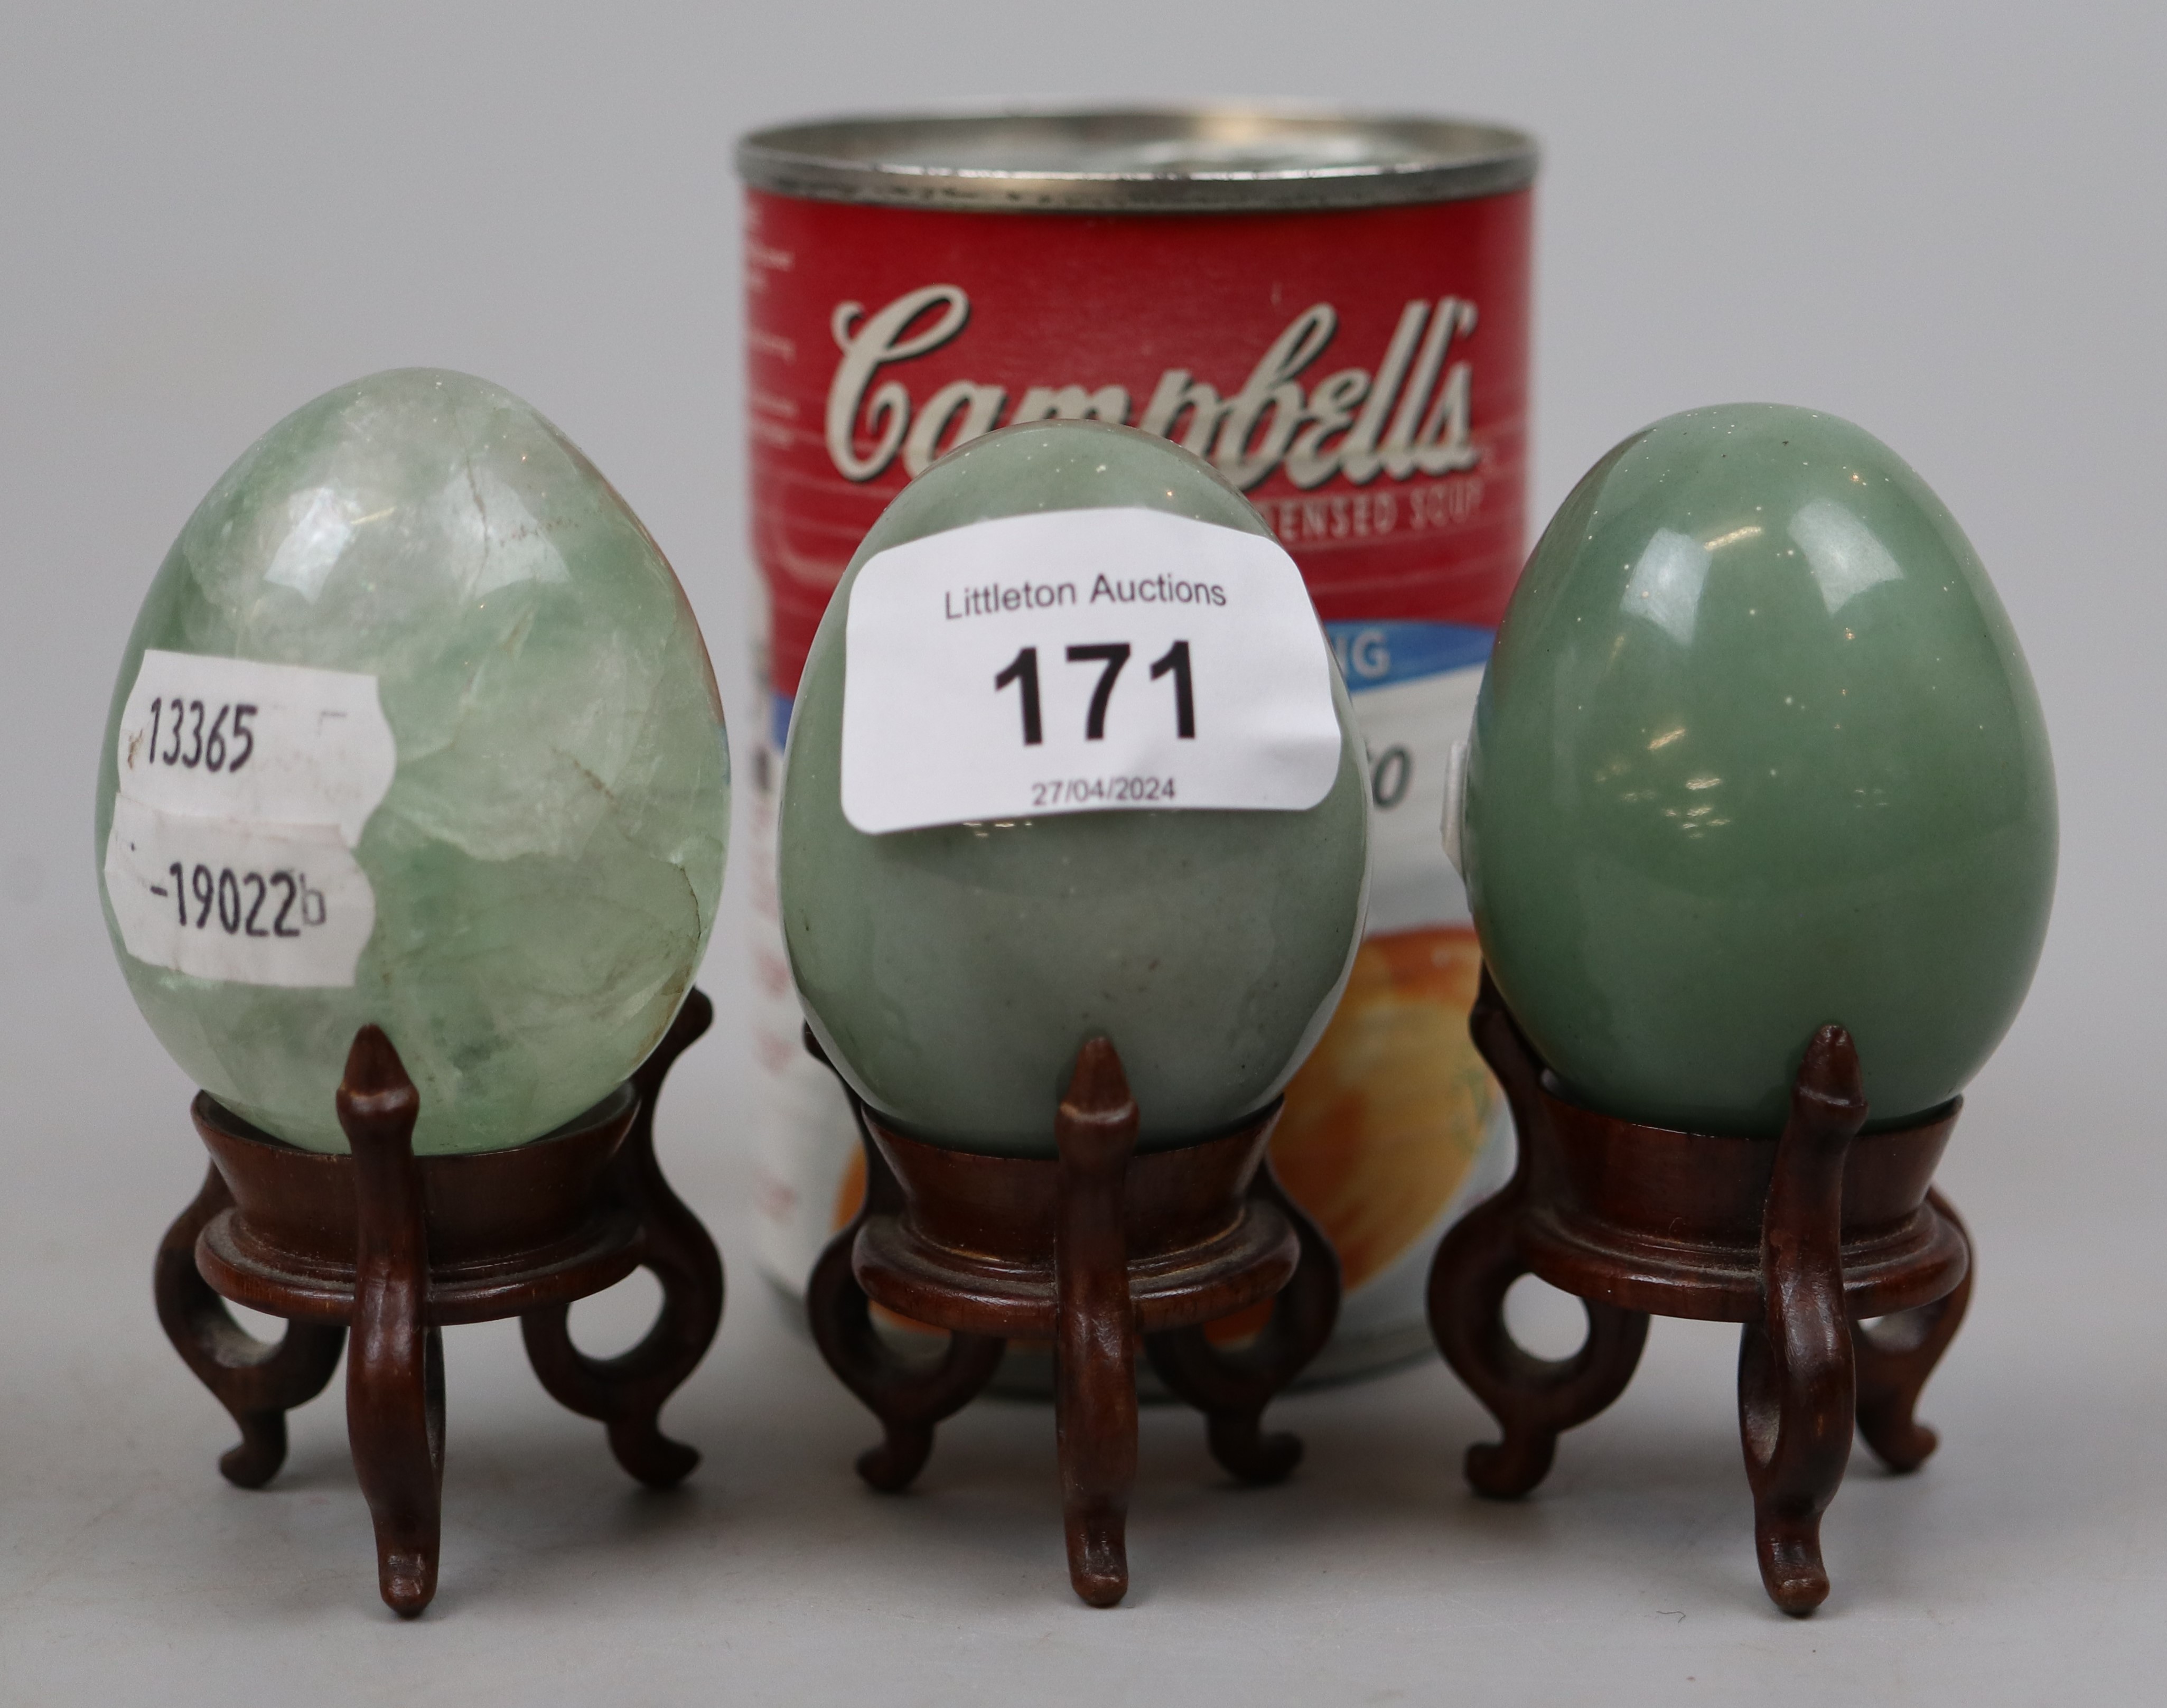 3 stone eggs on stands - 2 possibly jade - Image 2 of 2